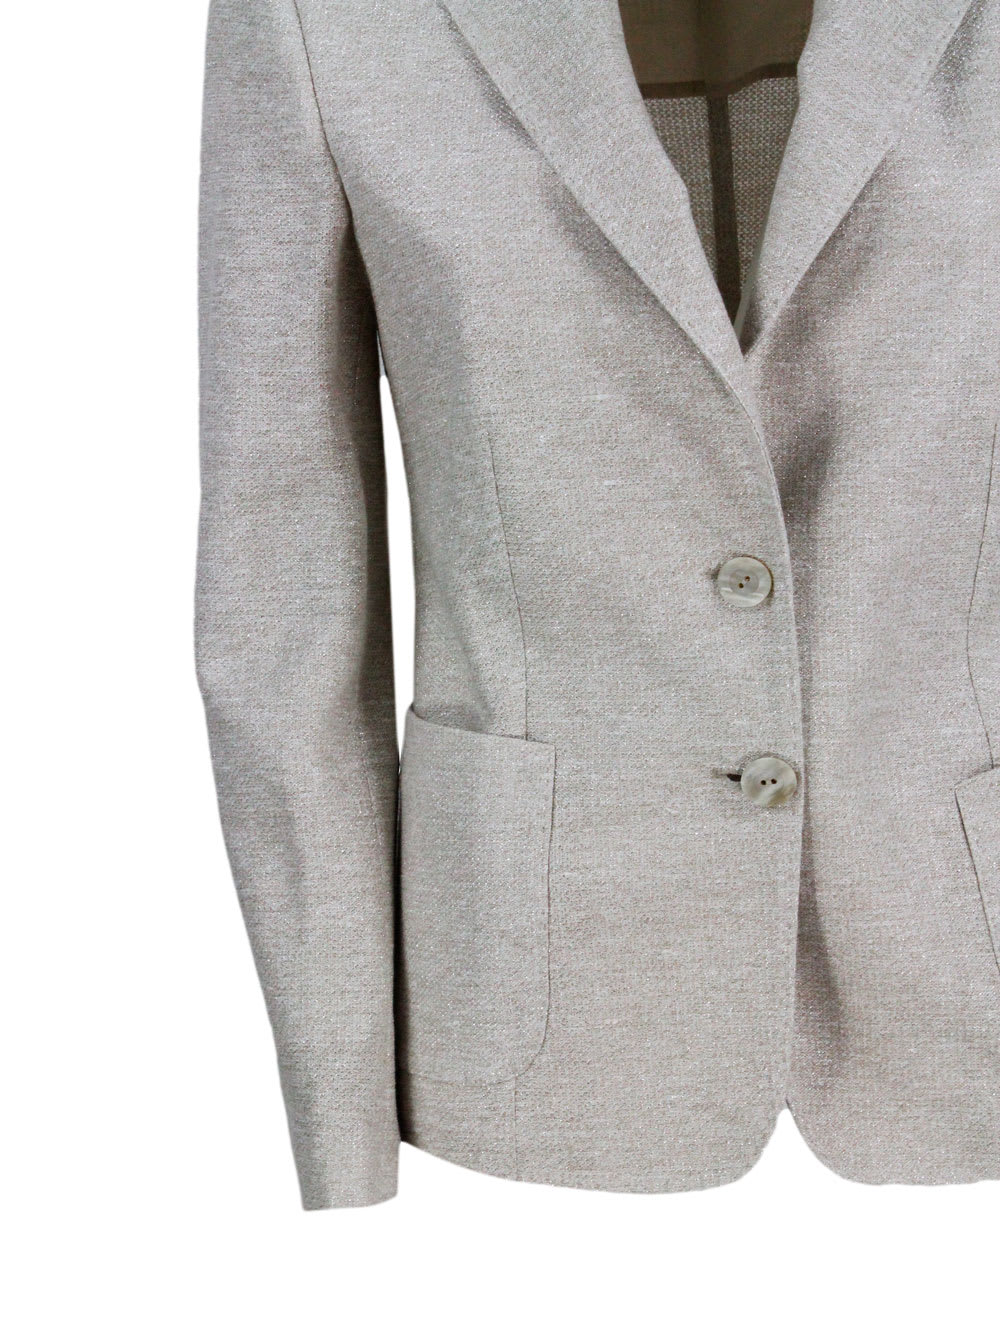 Shop Barba Napoli Single-breasted Two-button Jacket Made Of Linen And Cotton And Embellished With Bright Lurex Threads In Gold